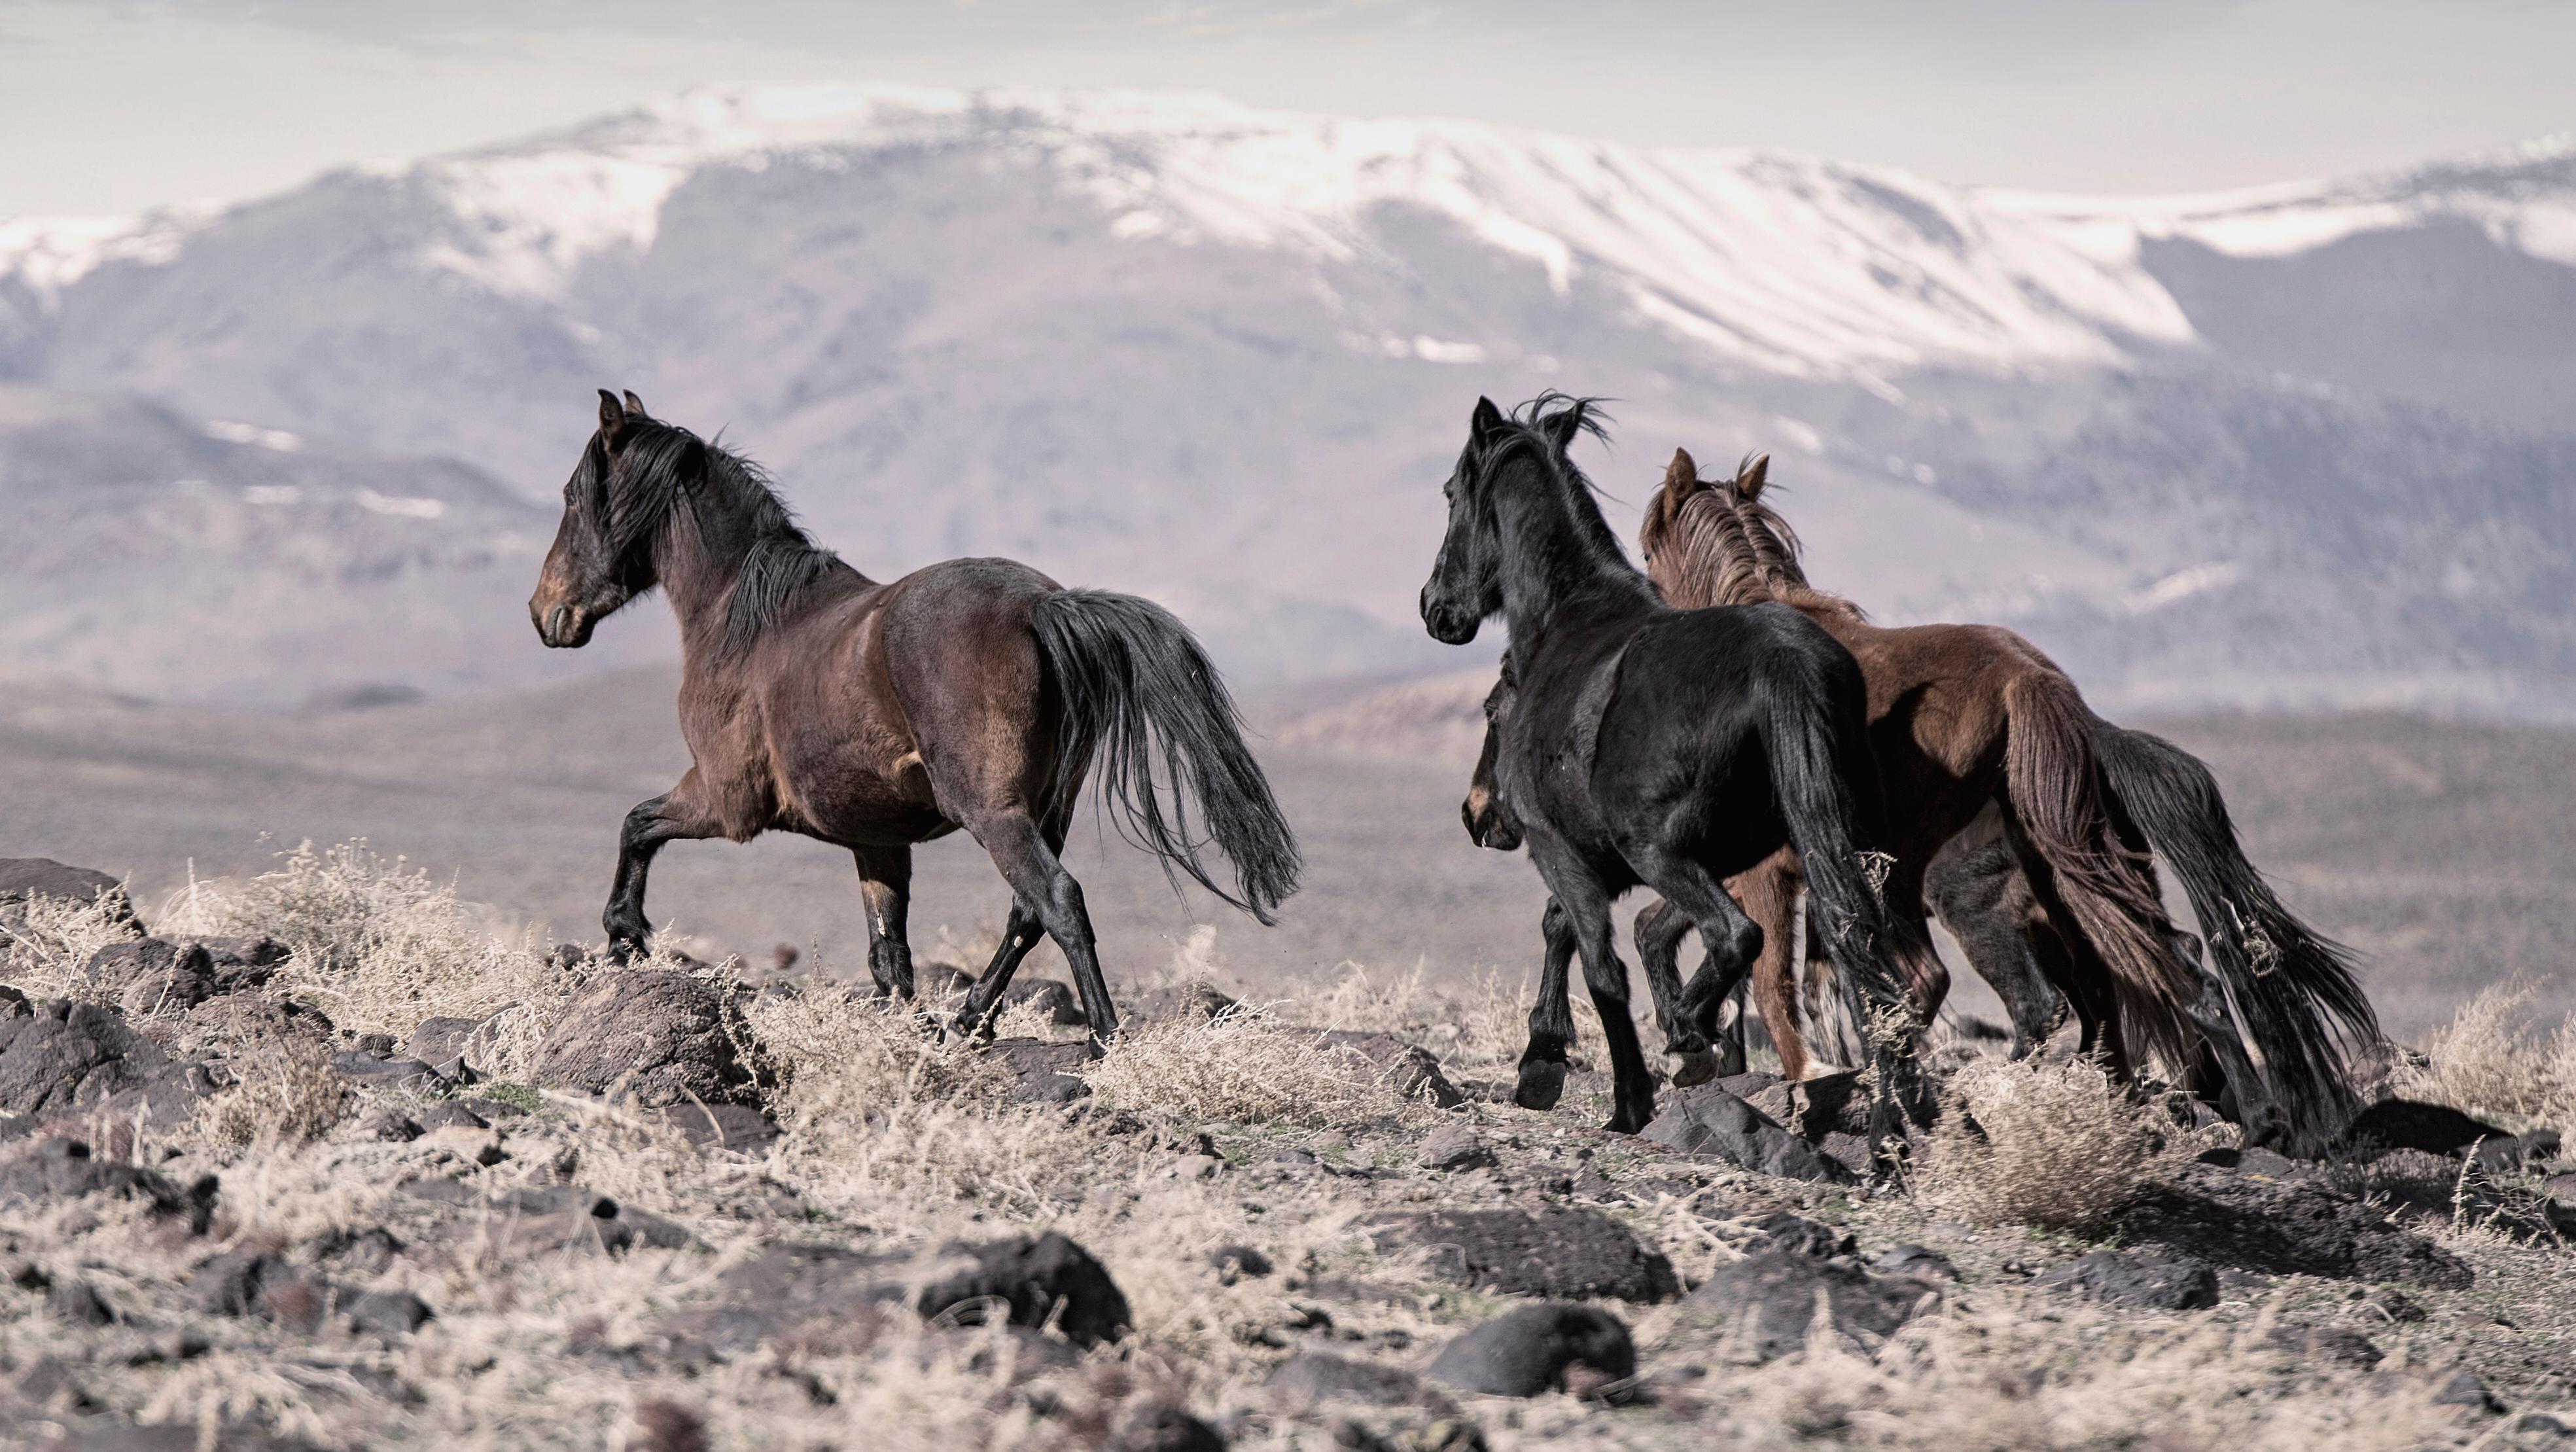 Shane Russeck Black and White Photograph - "On the Go" 40x55 Wild Horses, Mustangs Photography, Photograph Fine Art